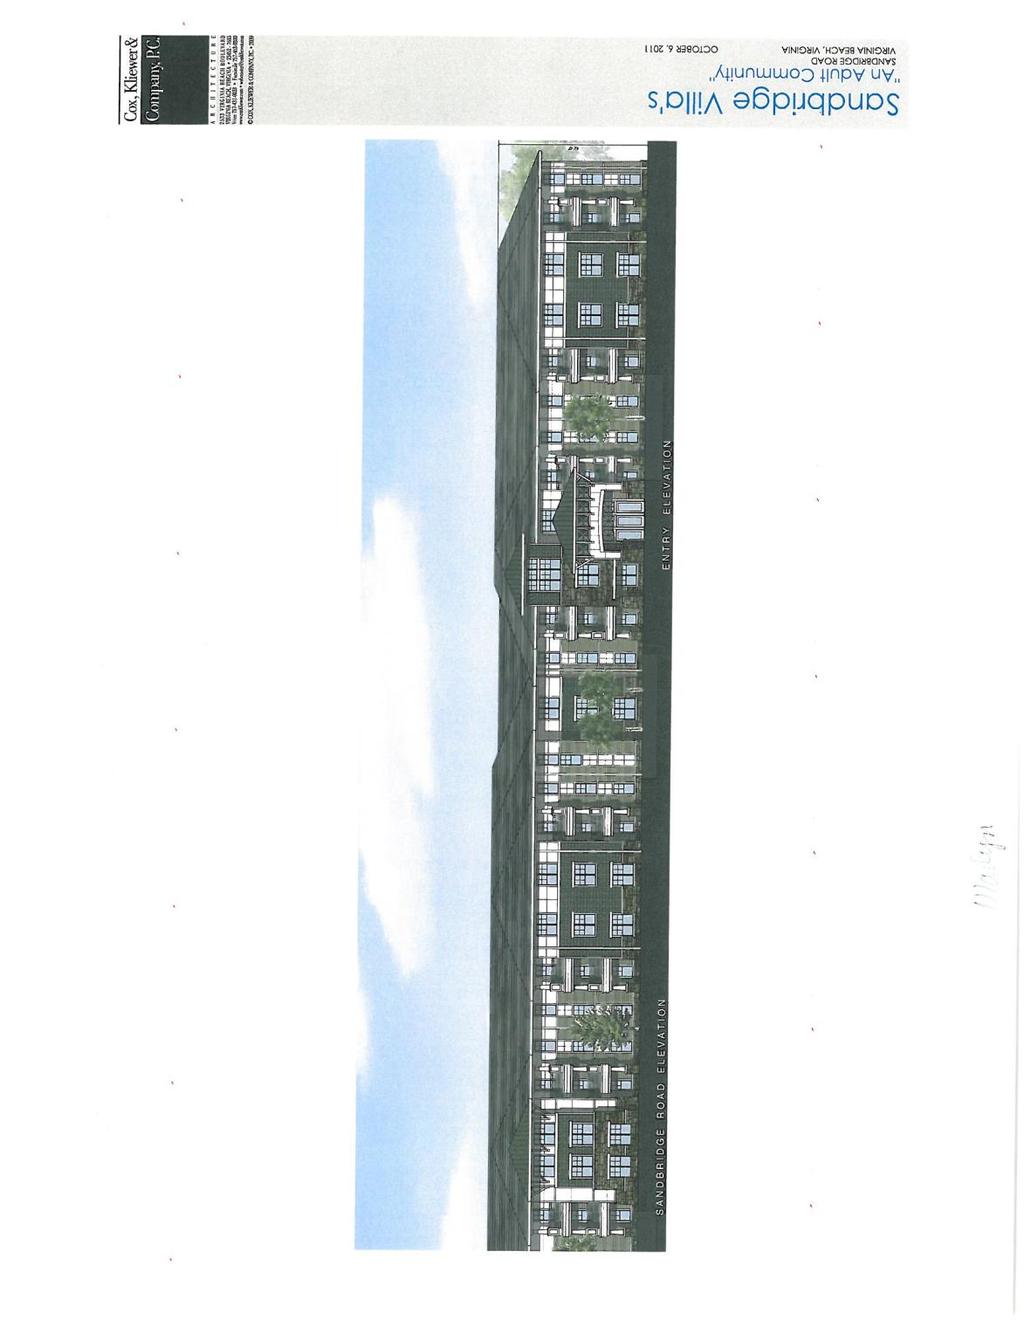 PROPOSED BUILDING